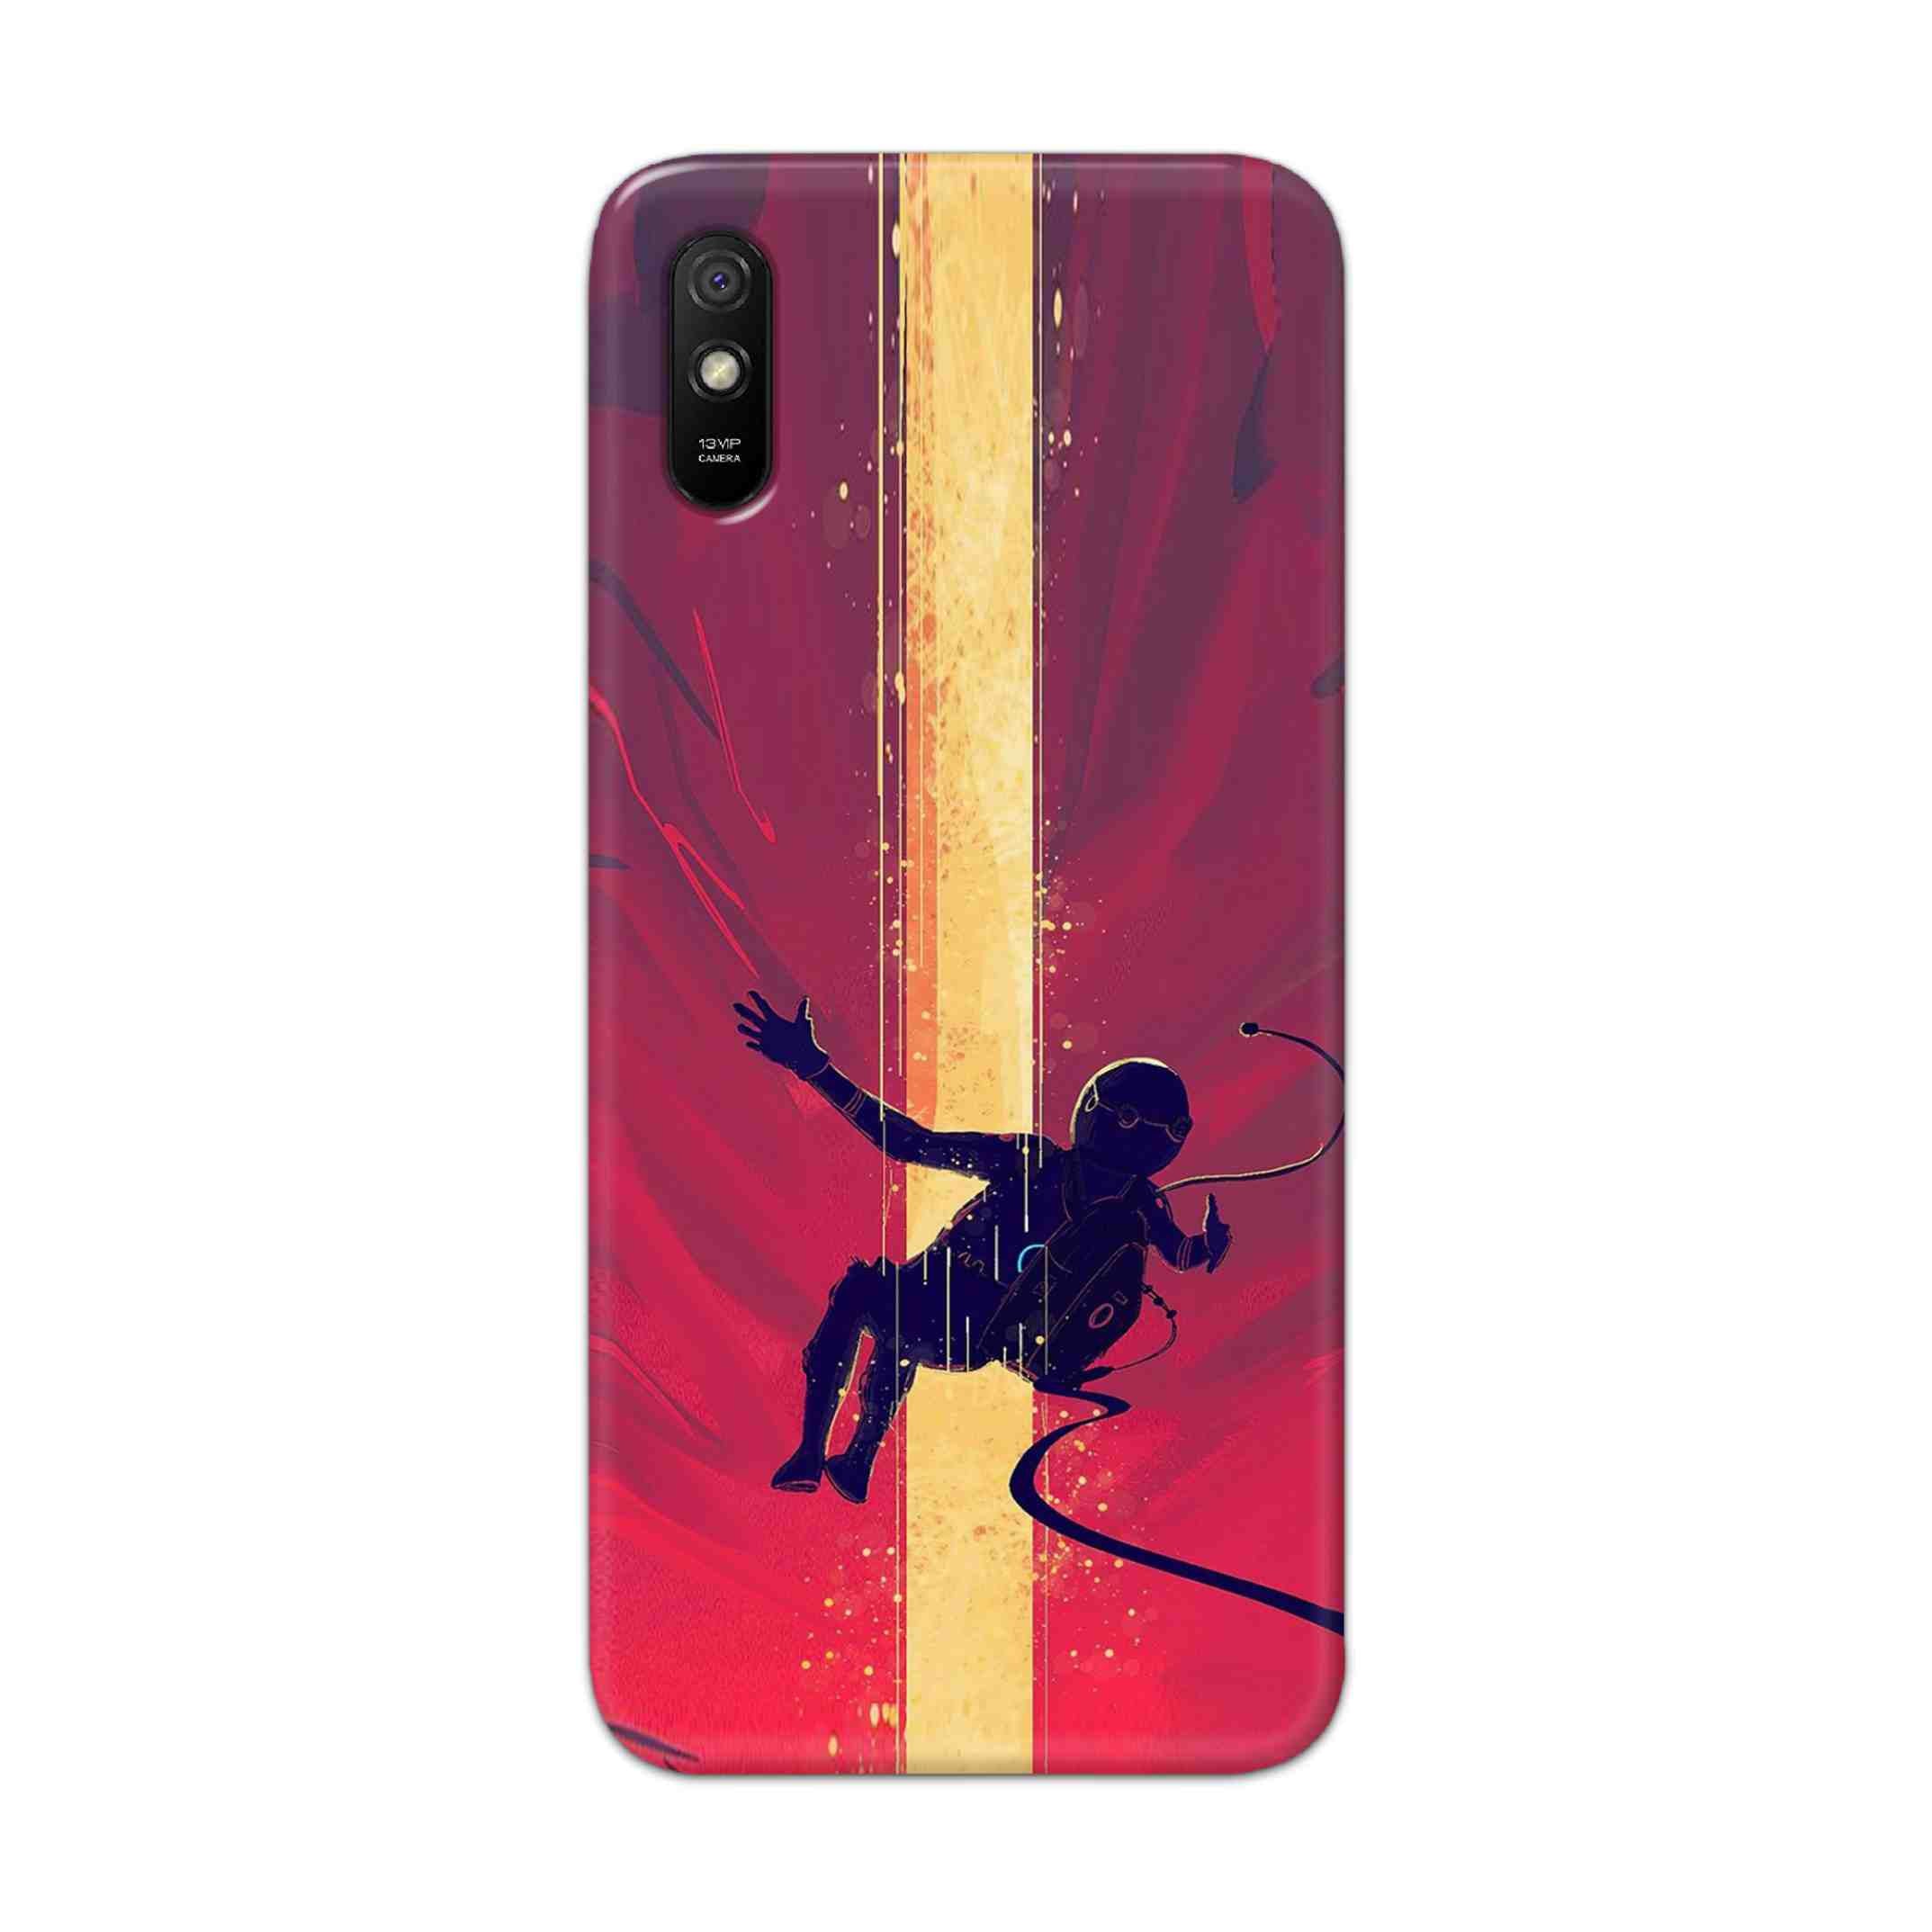 Buy Astronaut In Air Hard Back Mobile Phone Case Cover For Redmi 9A Online